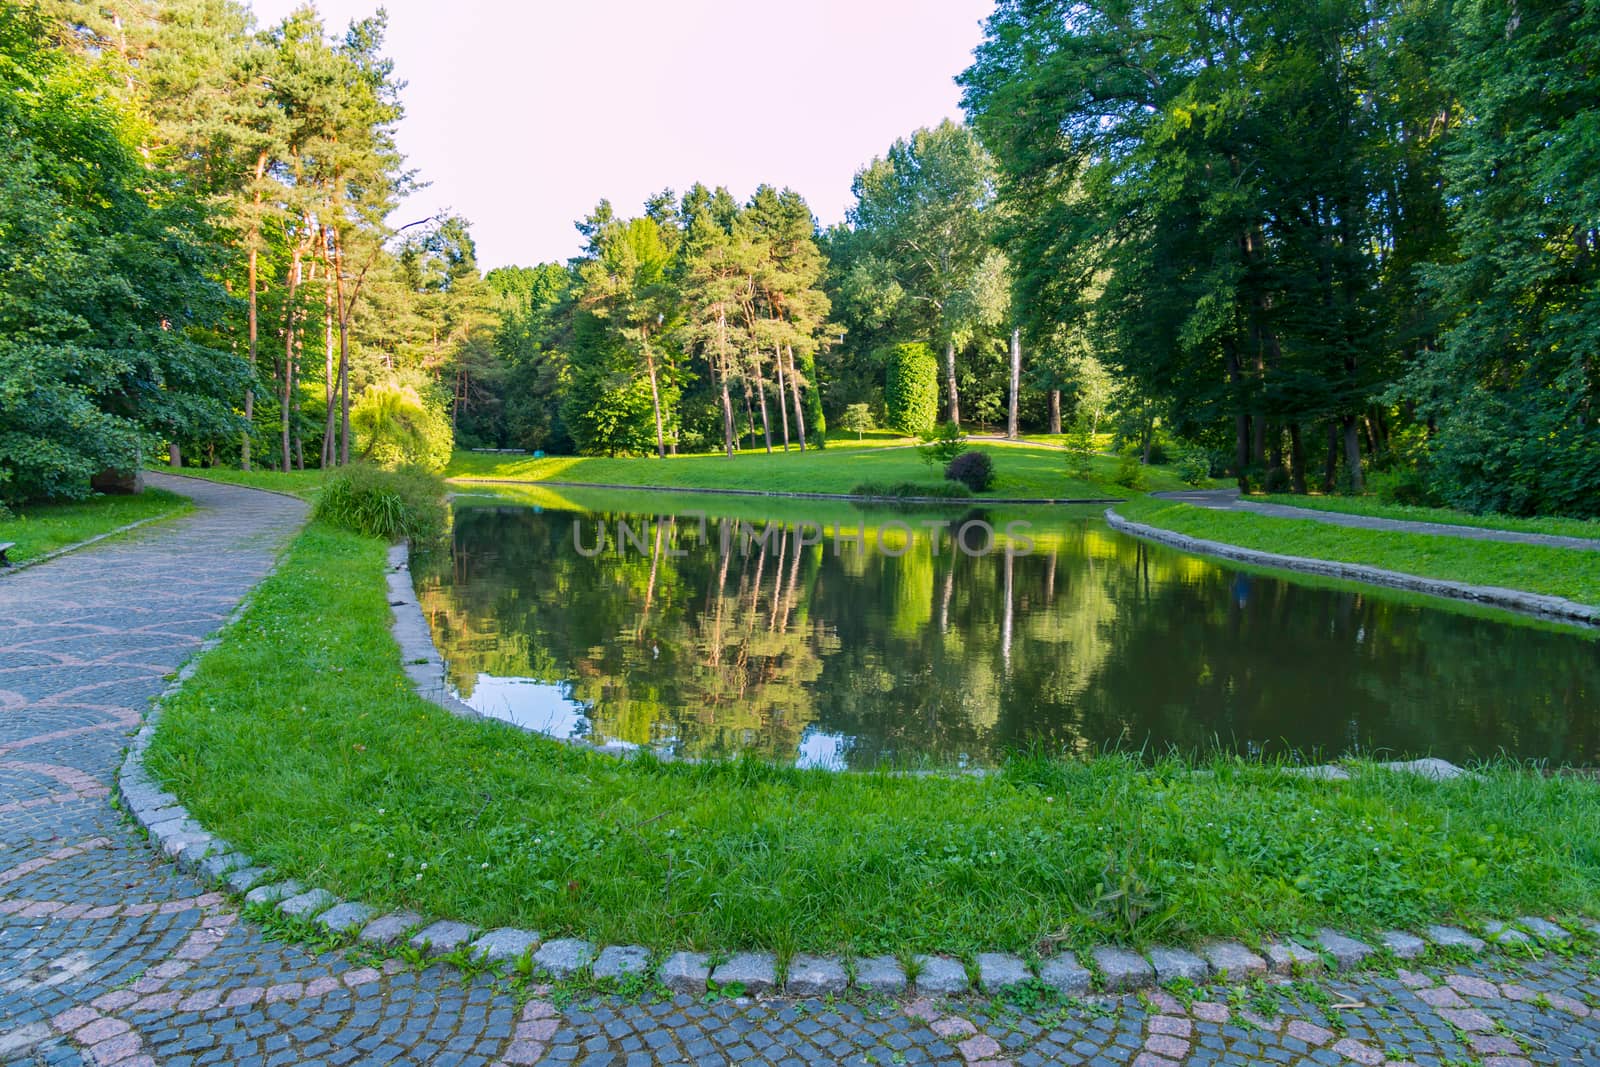 A clean decorative lake in the middle of a walk alley against the backdrop of the forested park trees by Adamchuk